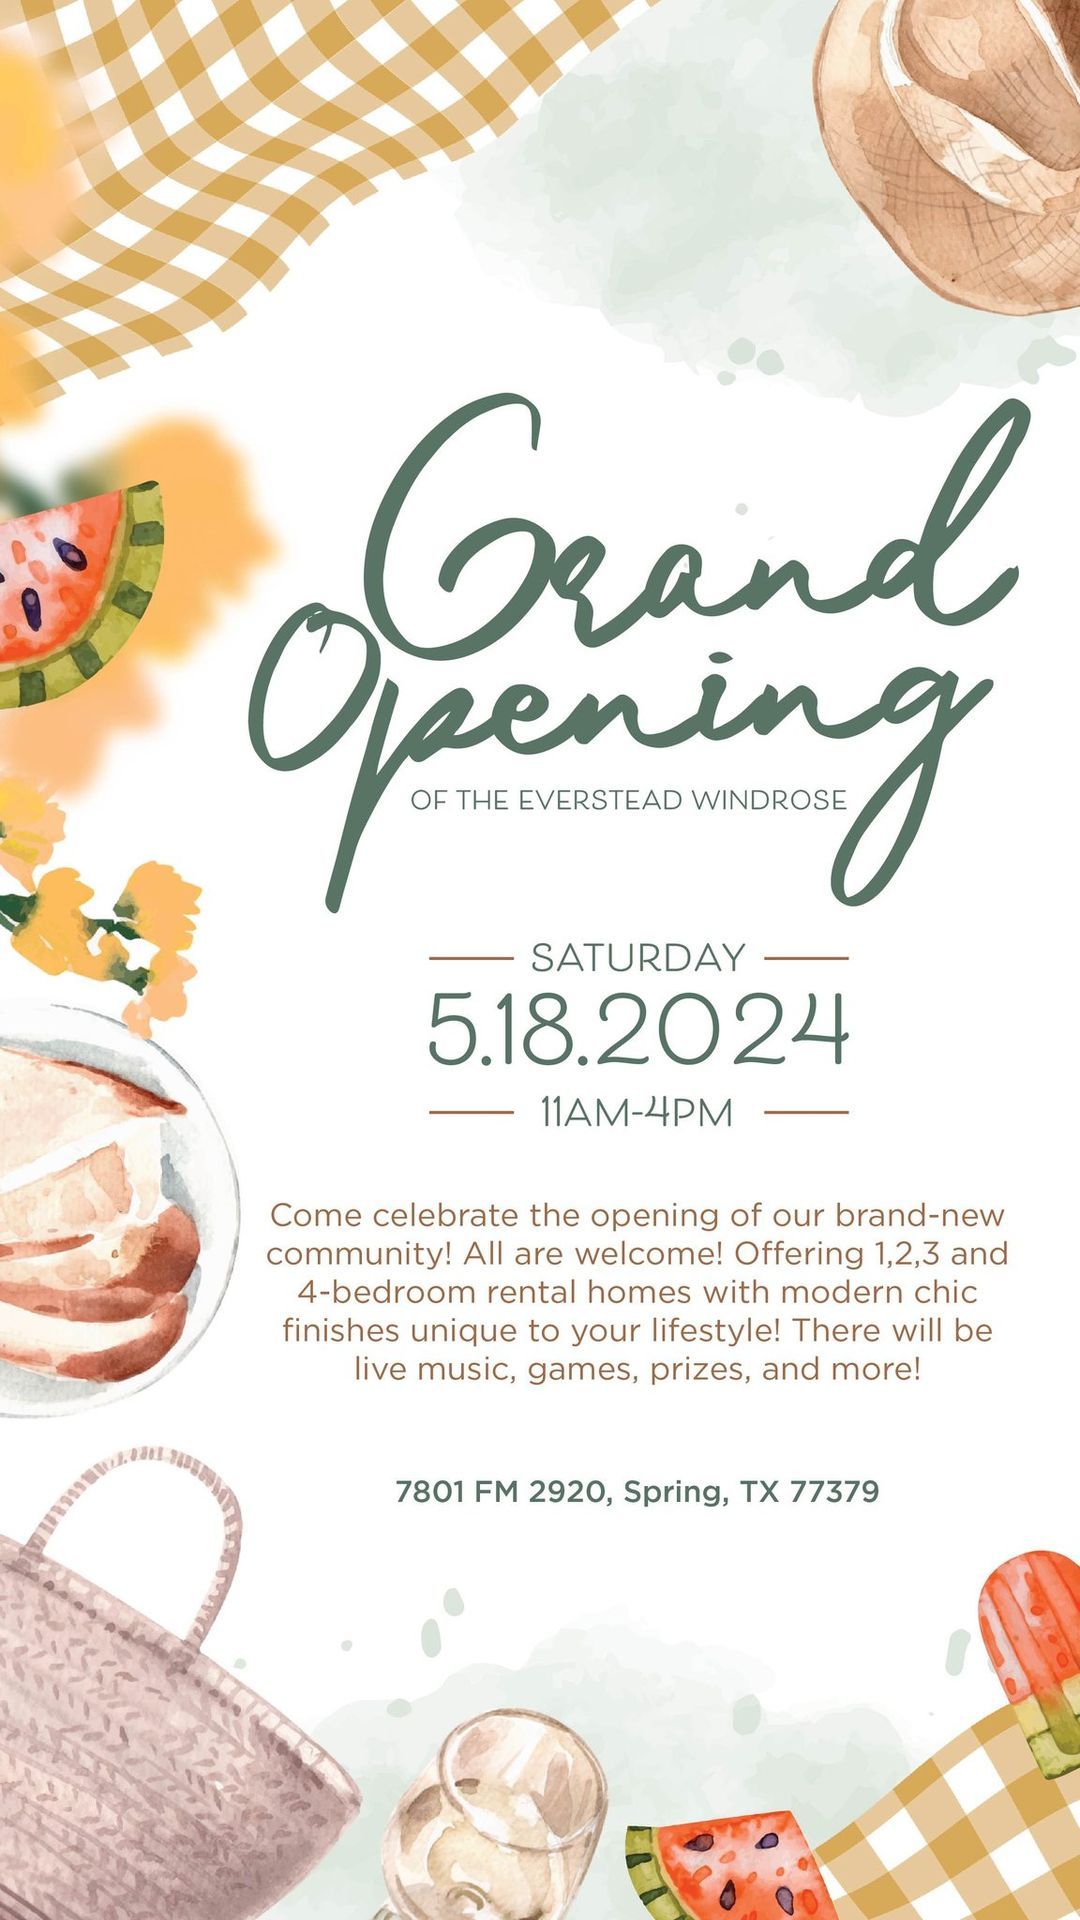 Grand Opening of The Everstead Windrose